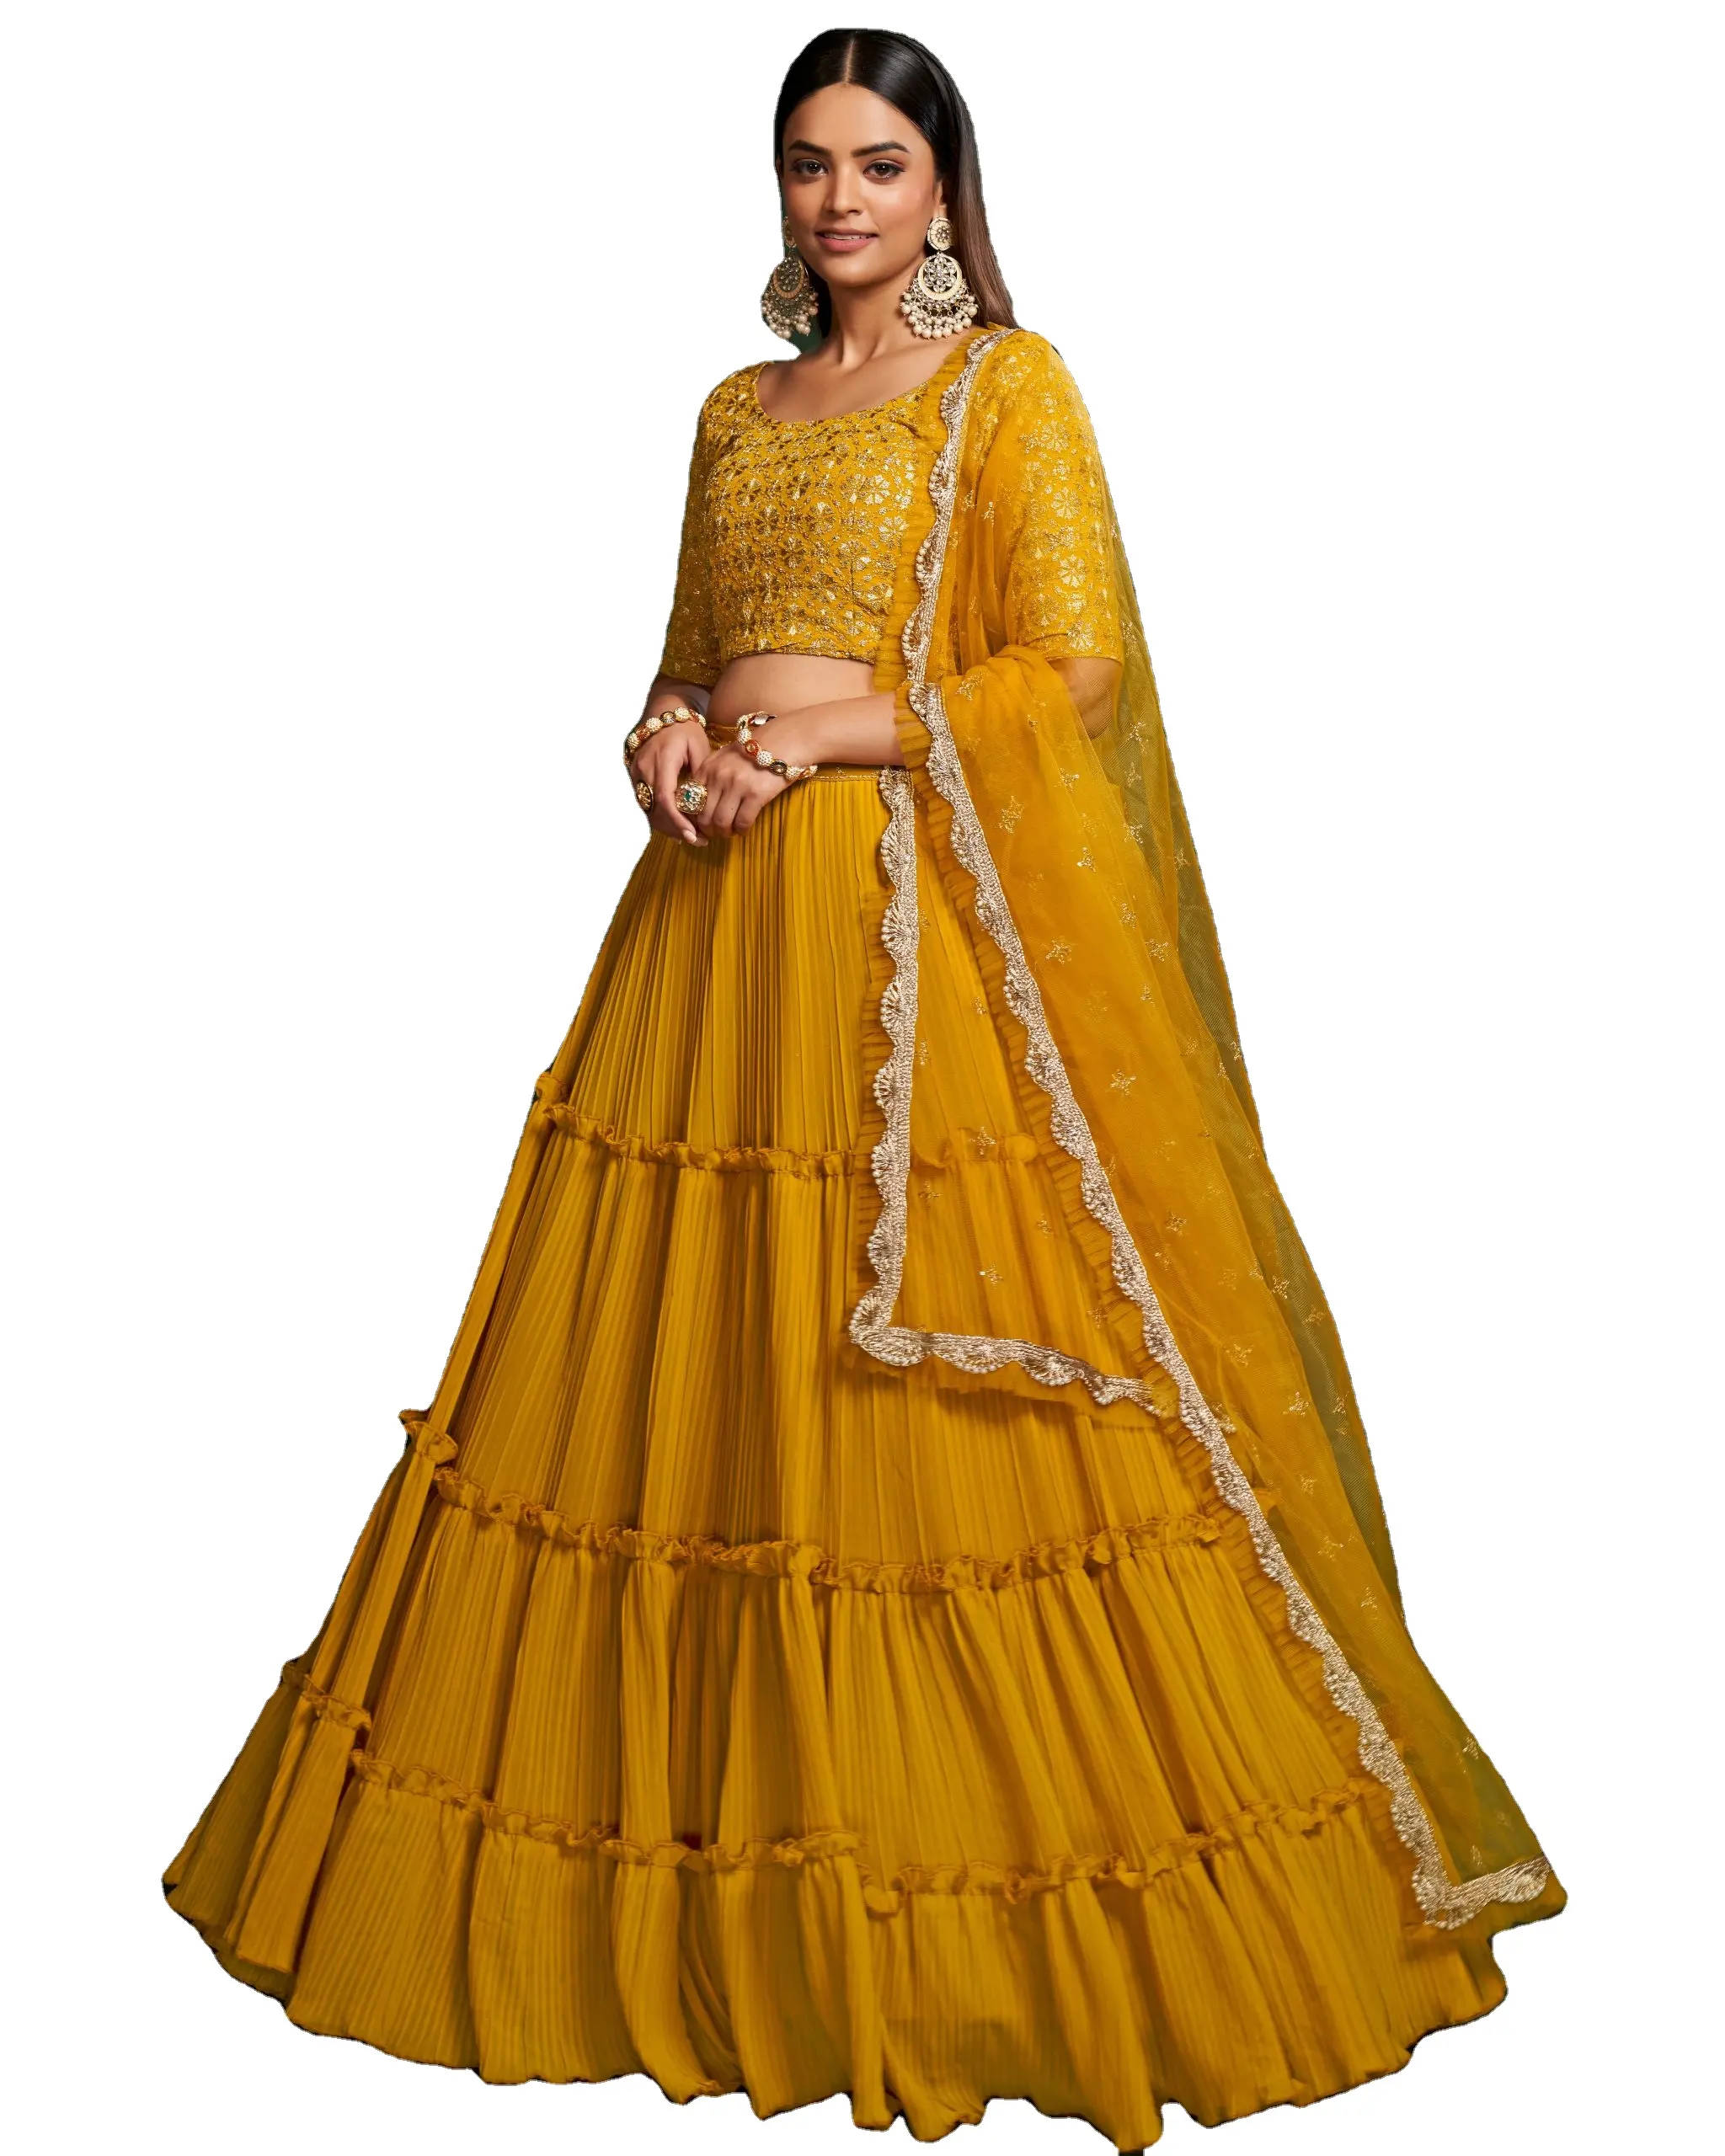 New Bulk Supply Wedding Wear Semi-stitched Faux Georgette Lehenga Choli for Womens from Indian Exporter